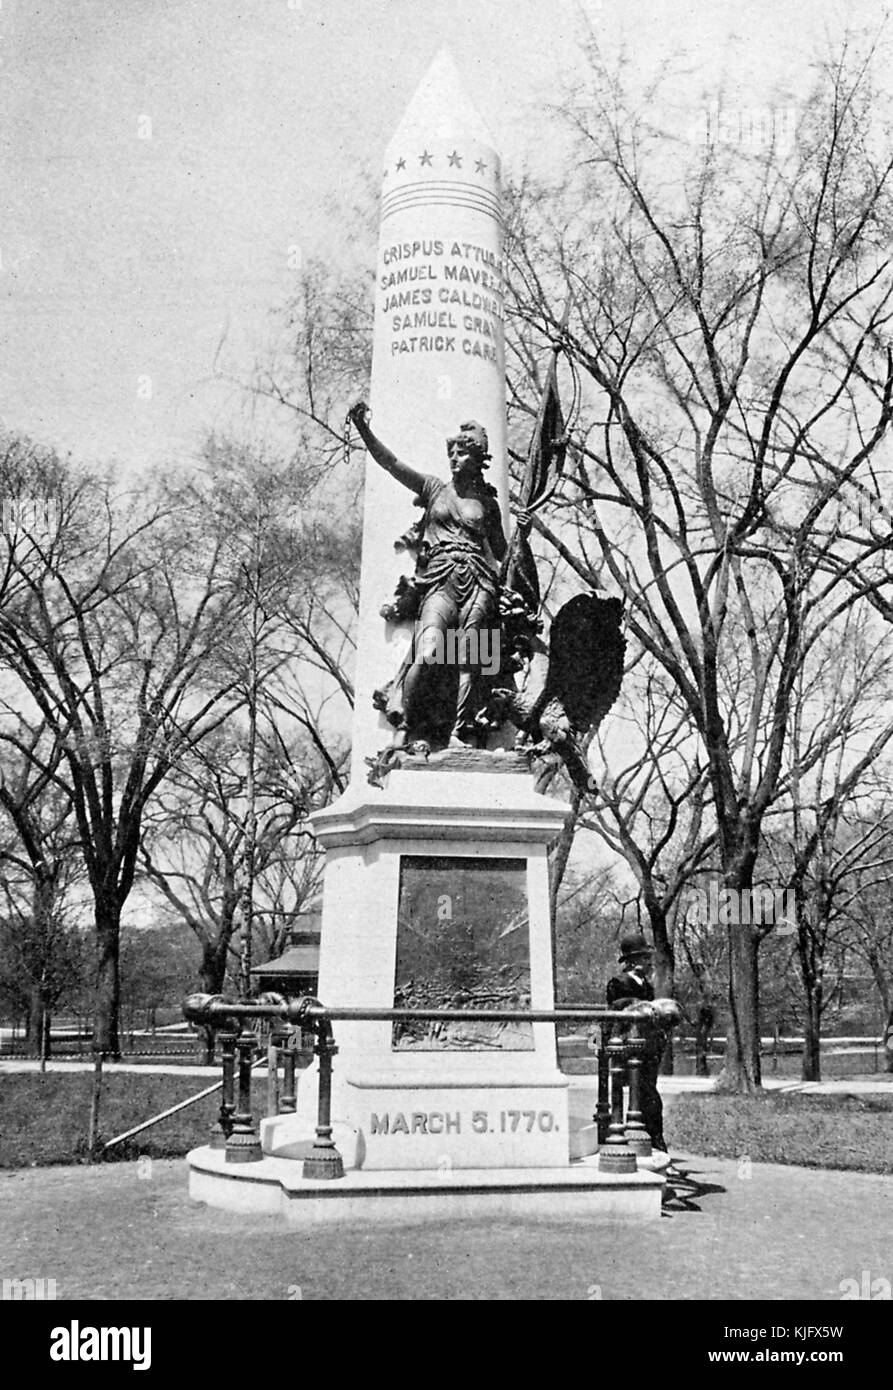 A photograph of the Boston Massacre Monument, the monument was constructed in 1888 as a memorial to the victims of the Boston Massacre, the names of the five men killed in the attack are engraved on the central tower of the monument, a statue on the monument represents liberty and she holds a broken chain and a flag, a man can be seen standing near the monument in the photo, Boston, Massachusetts, 1905. Stock Photo